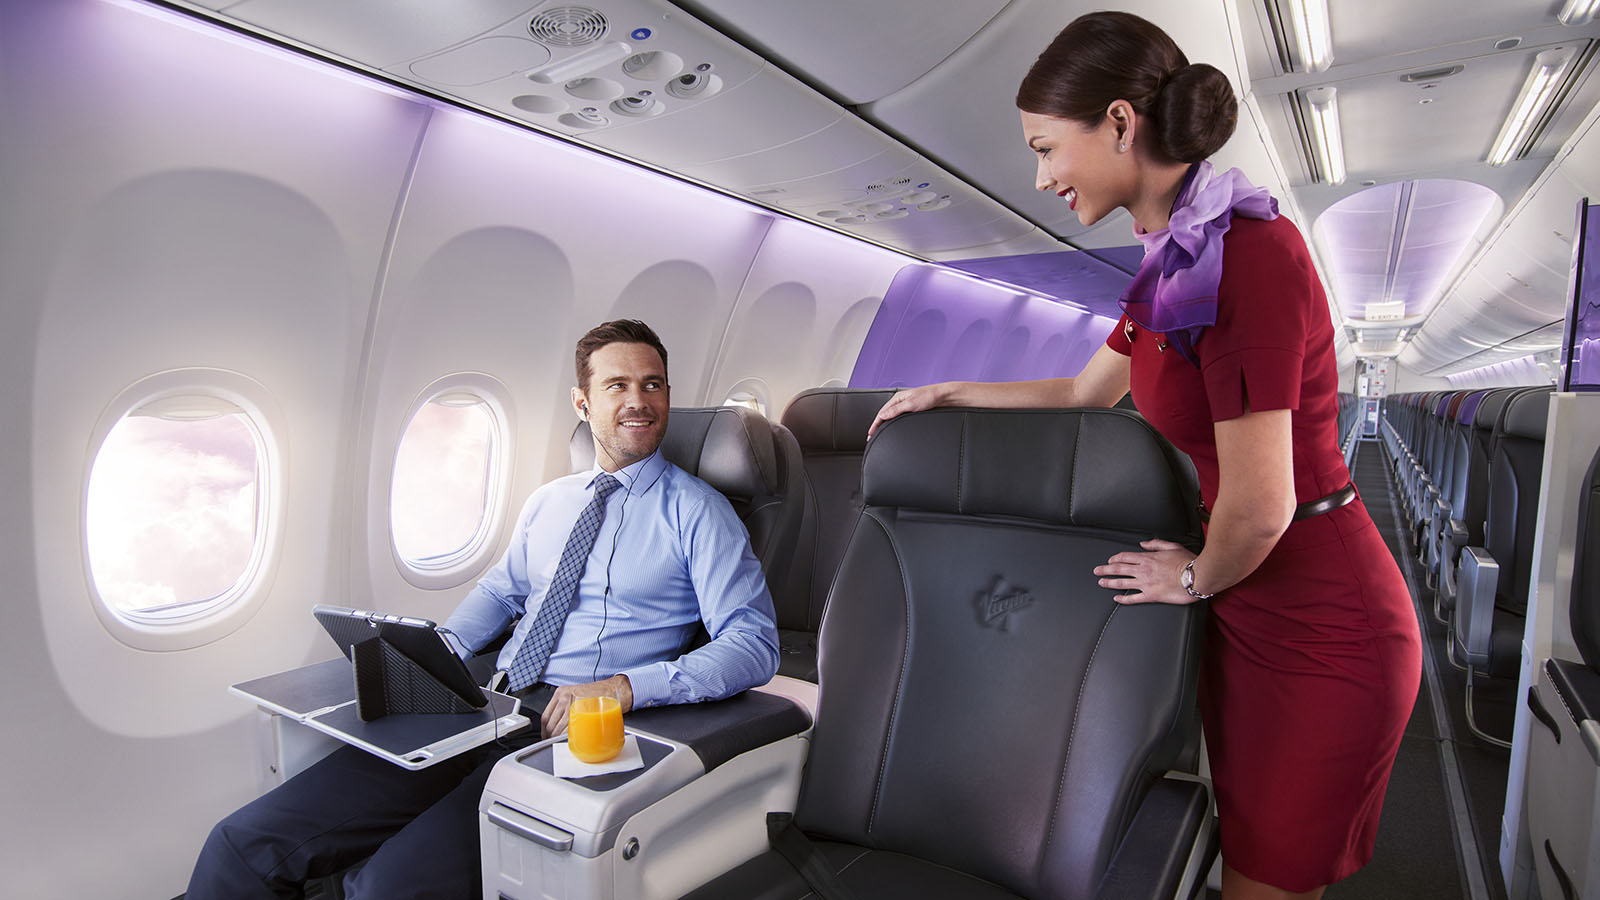 Service from the cabin crew in Virgin Australia Business Class